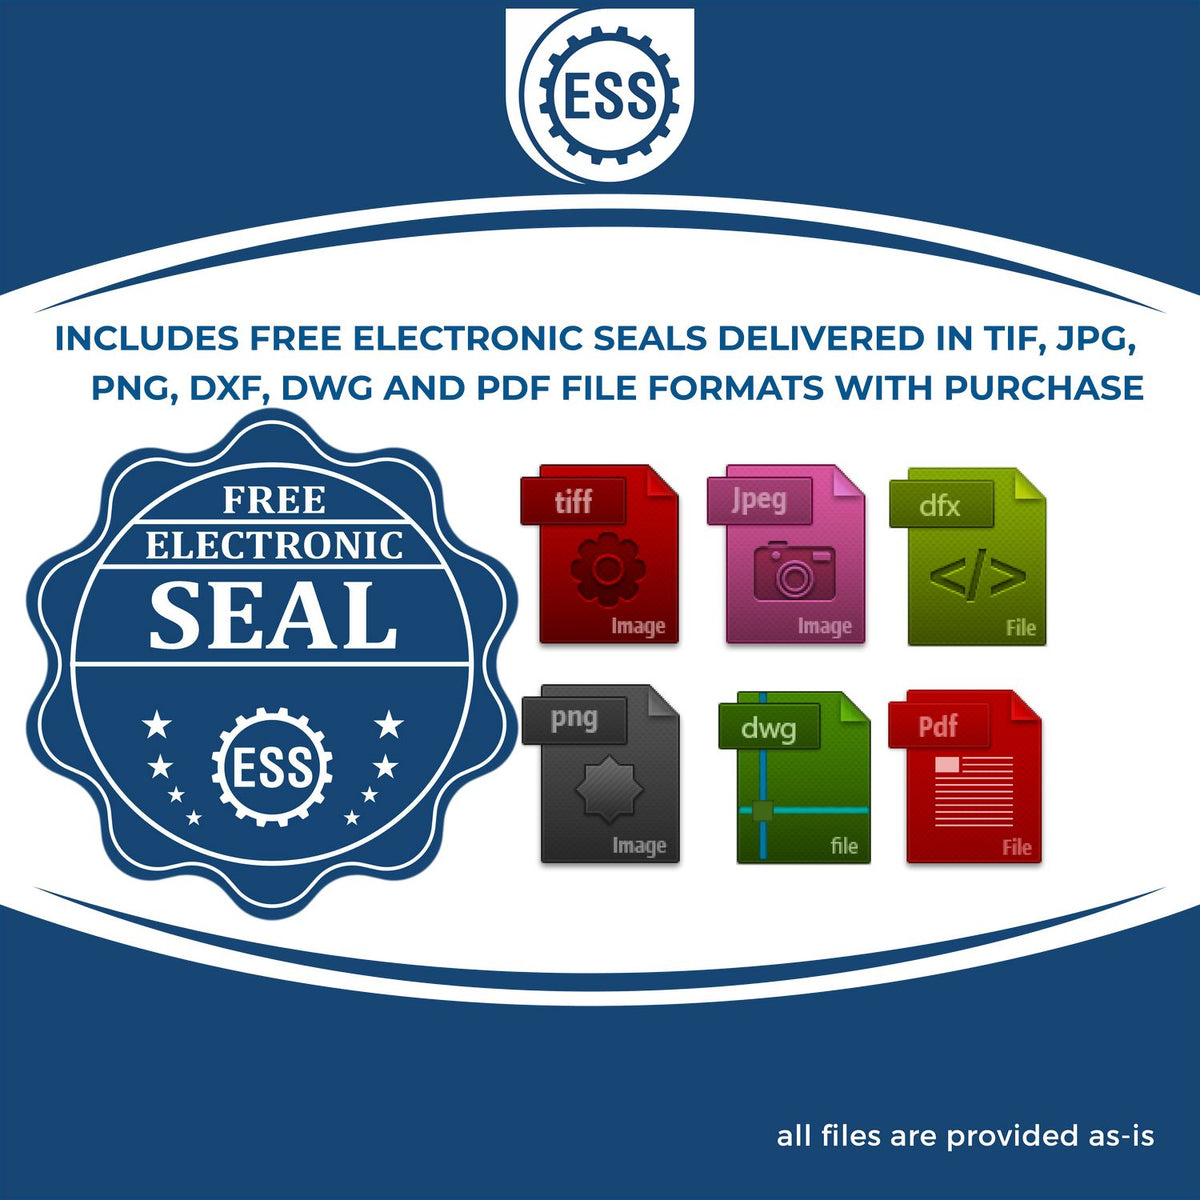 An infographic for the free electronic seal for the Premium MaxLight Pre-Inked Florida Geology Stamp illustrating the different file type icons such as DXF, DWG, TIF, JPG and PNG.